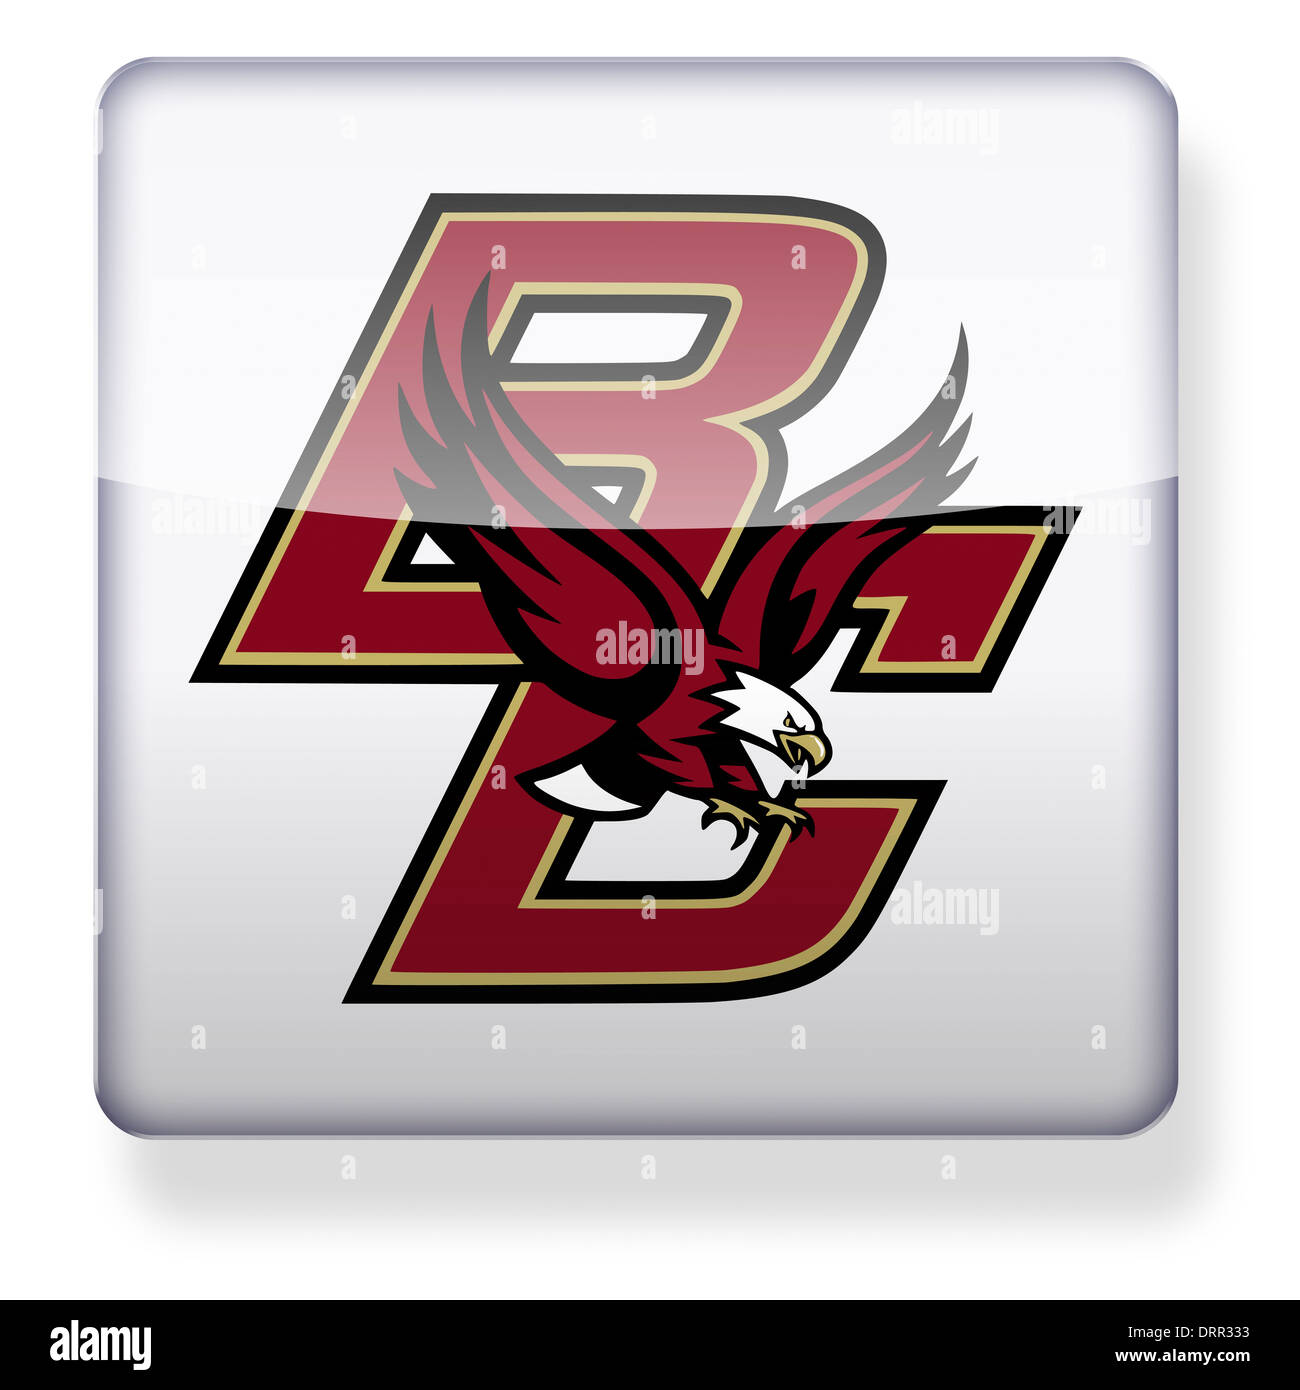 Boston College Eagles US college football logo as an app icon. Clipping path included. Stock Photo